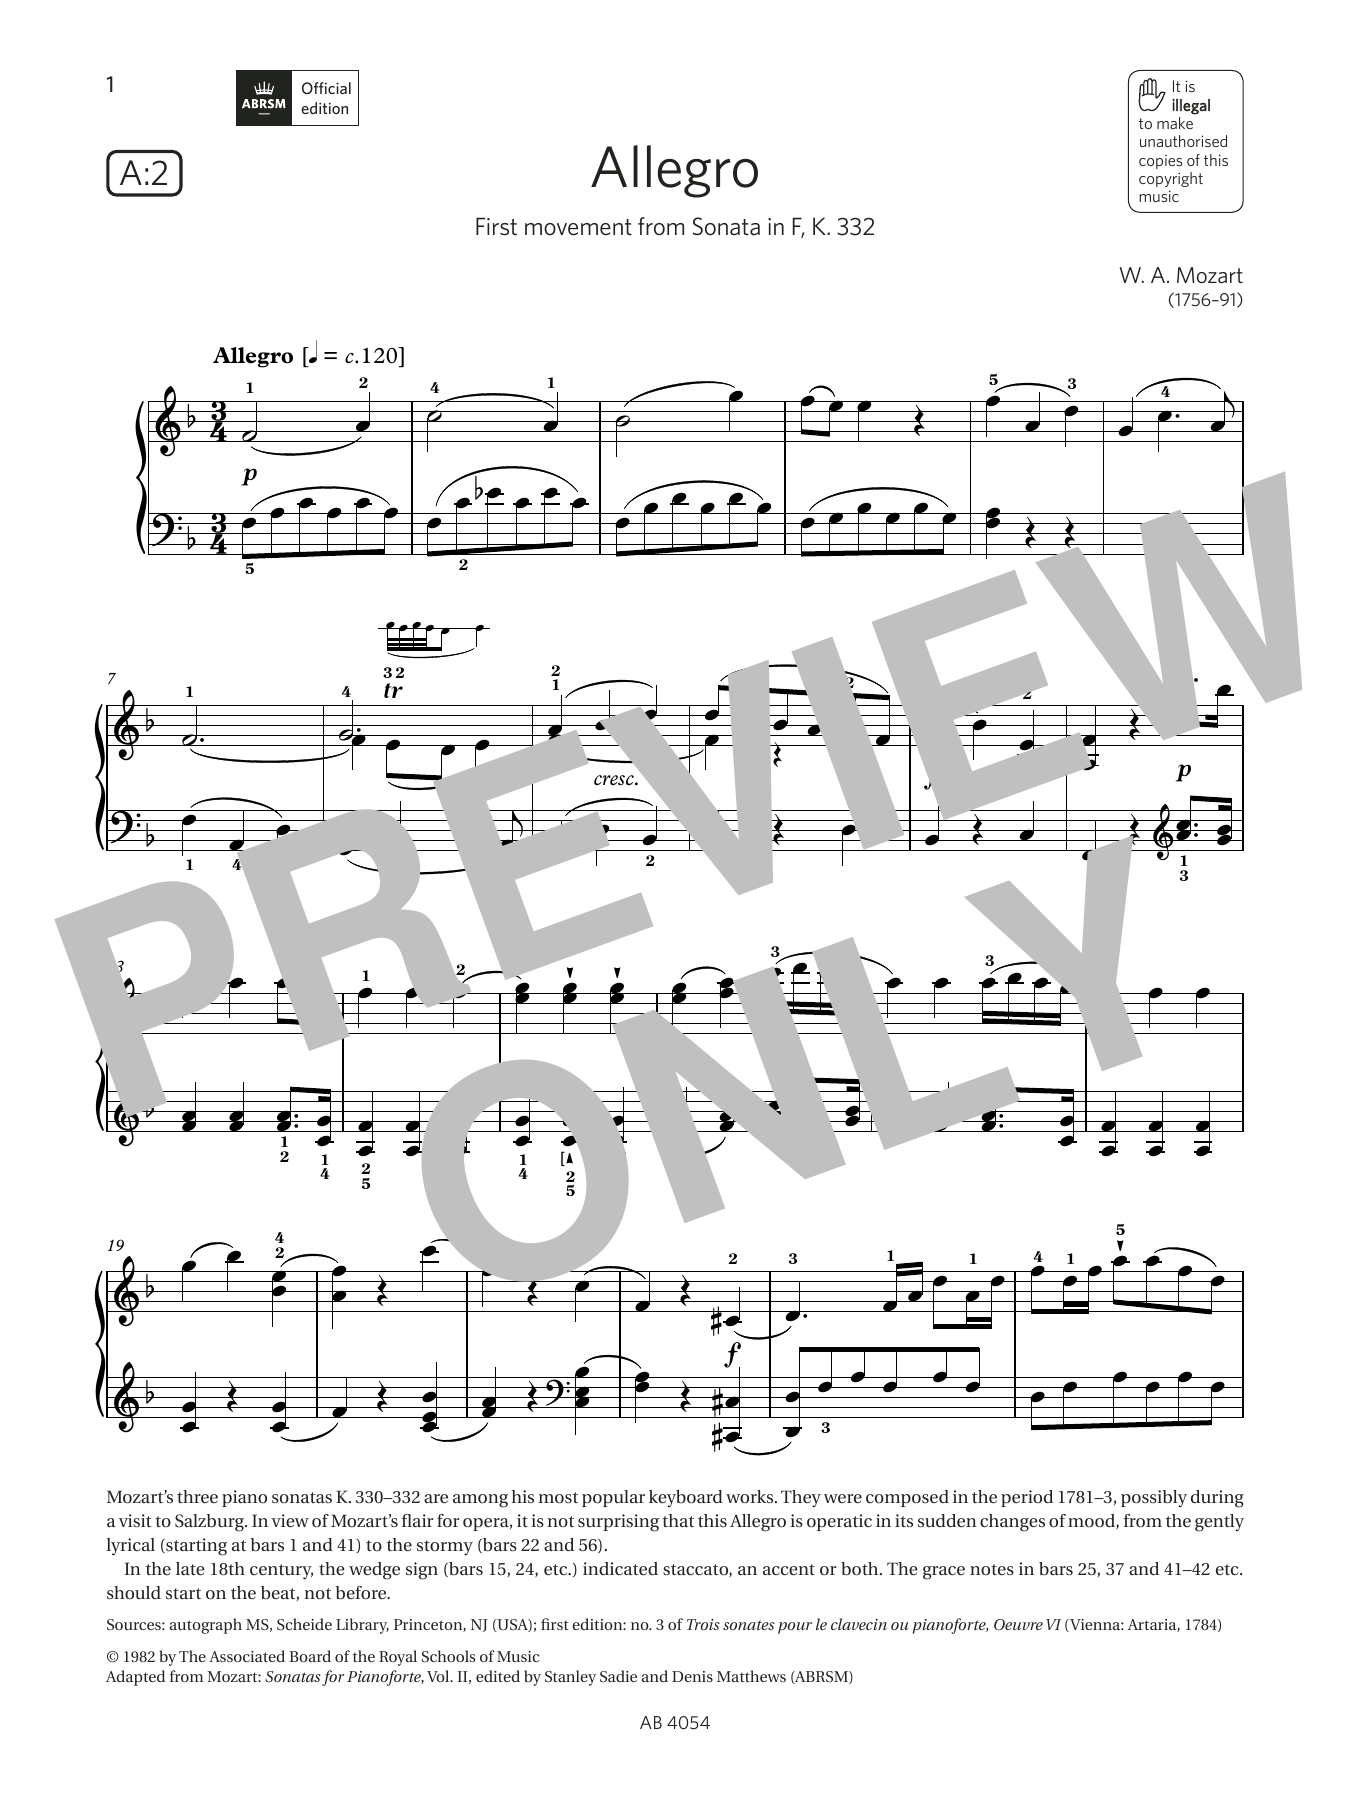 Download W A Mozart Allegro (Grade 8, list A2, from the ABR Sheet Music